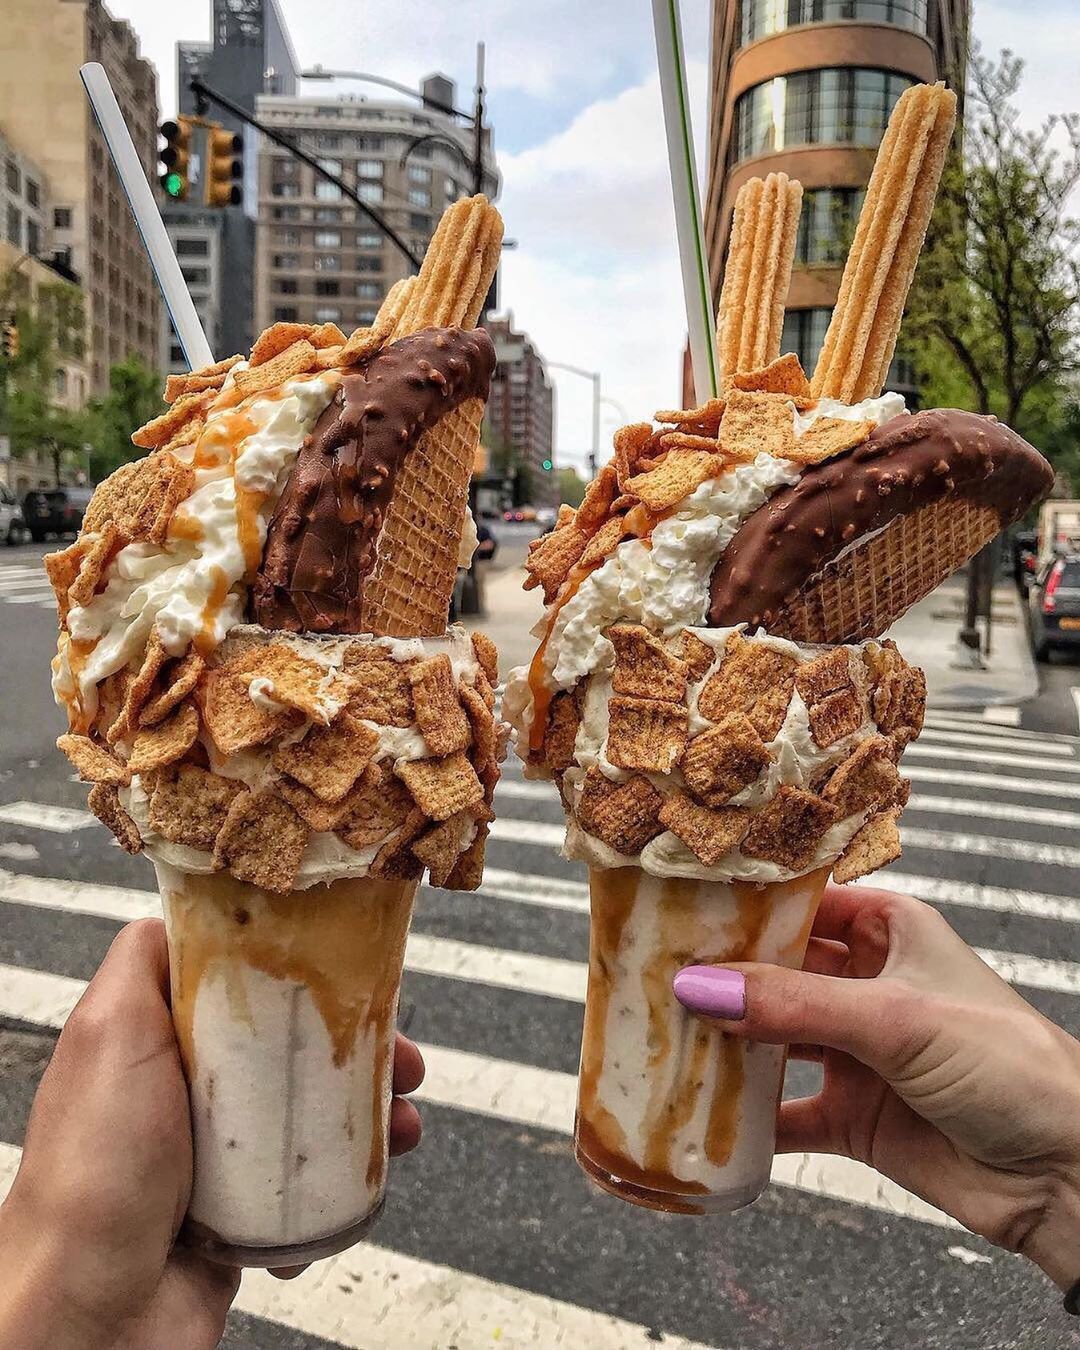 8 Most Amazing Dessert Spots In New York City To Try Before You Die - TheFab20s